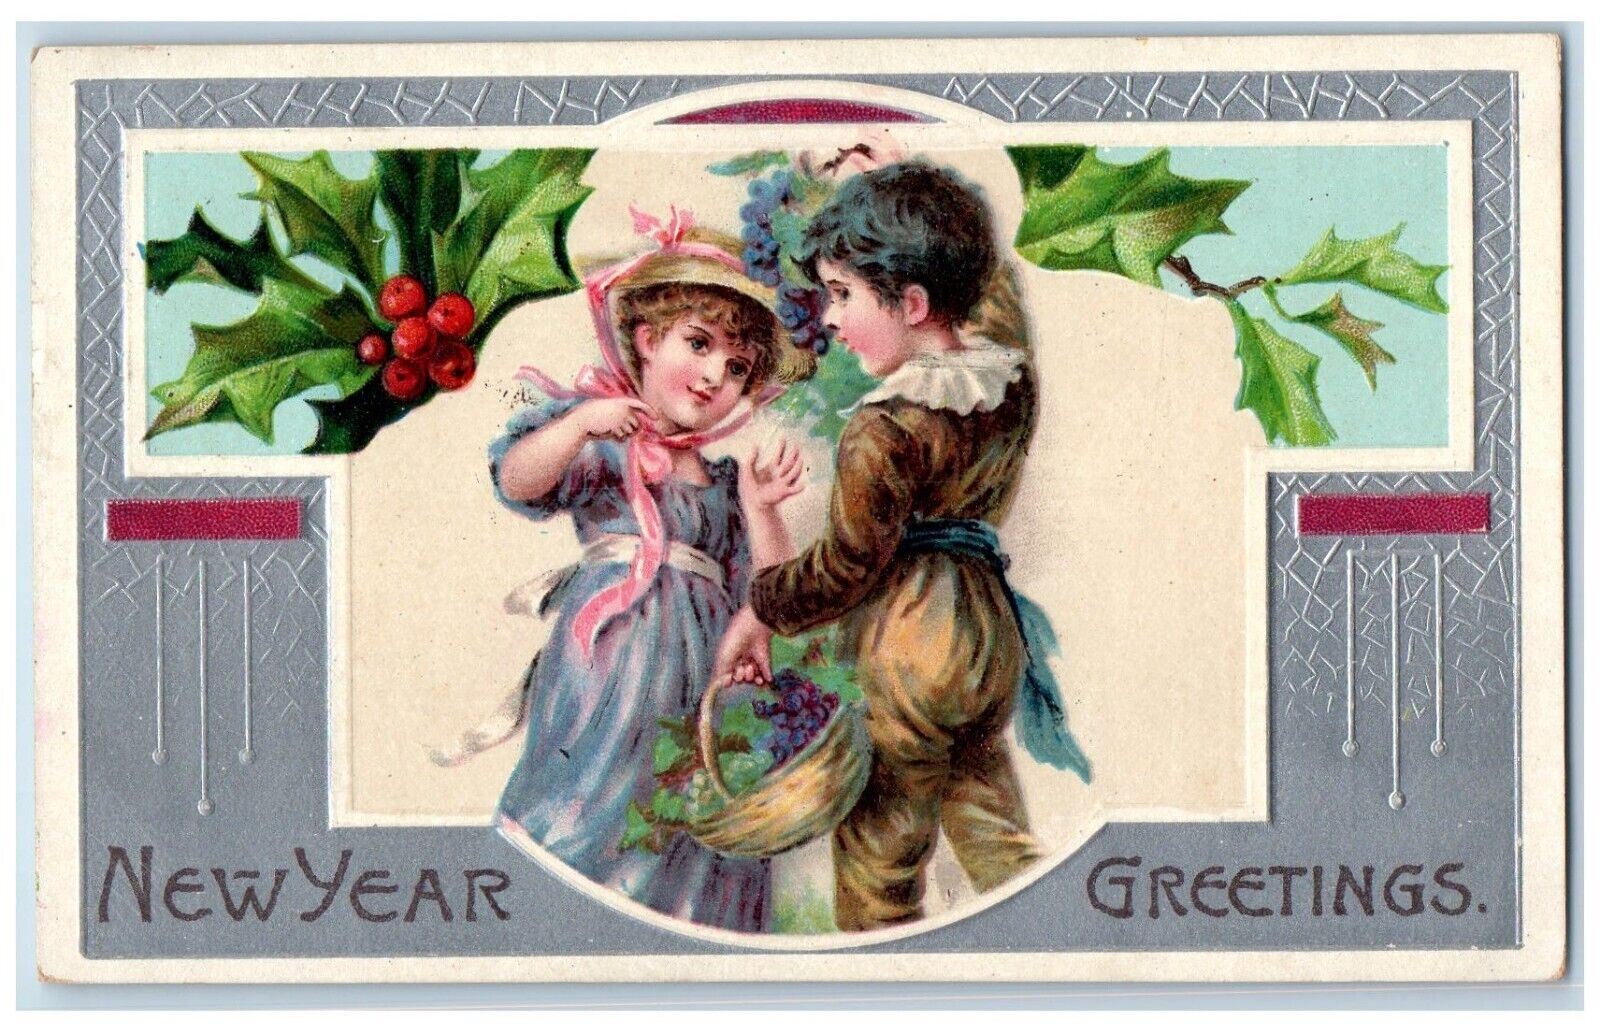 1910 New Year Greetings Children Holding Grapes In Basket Berries Postcard